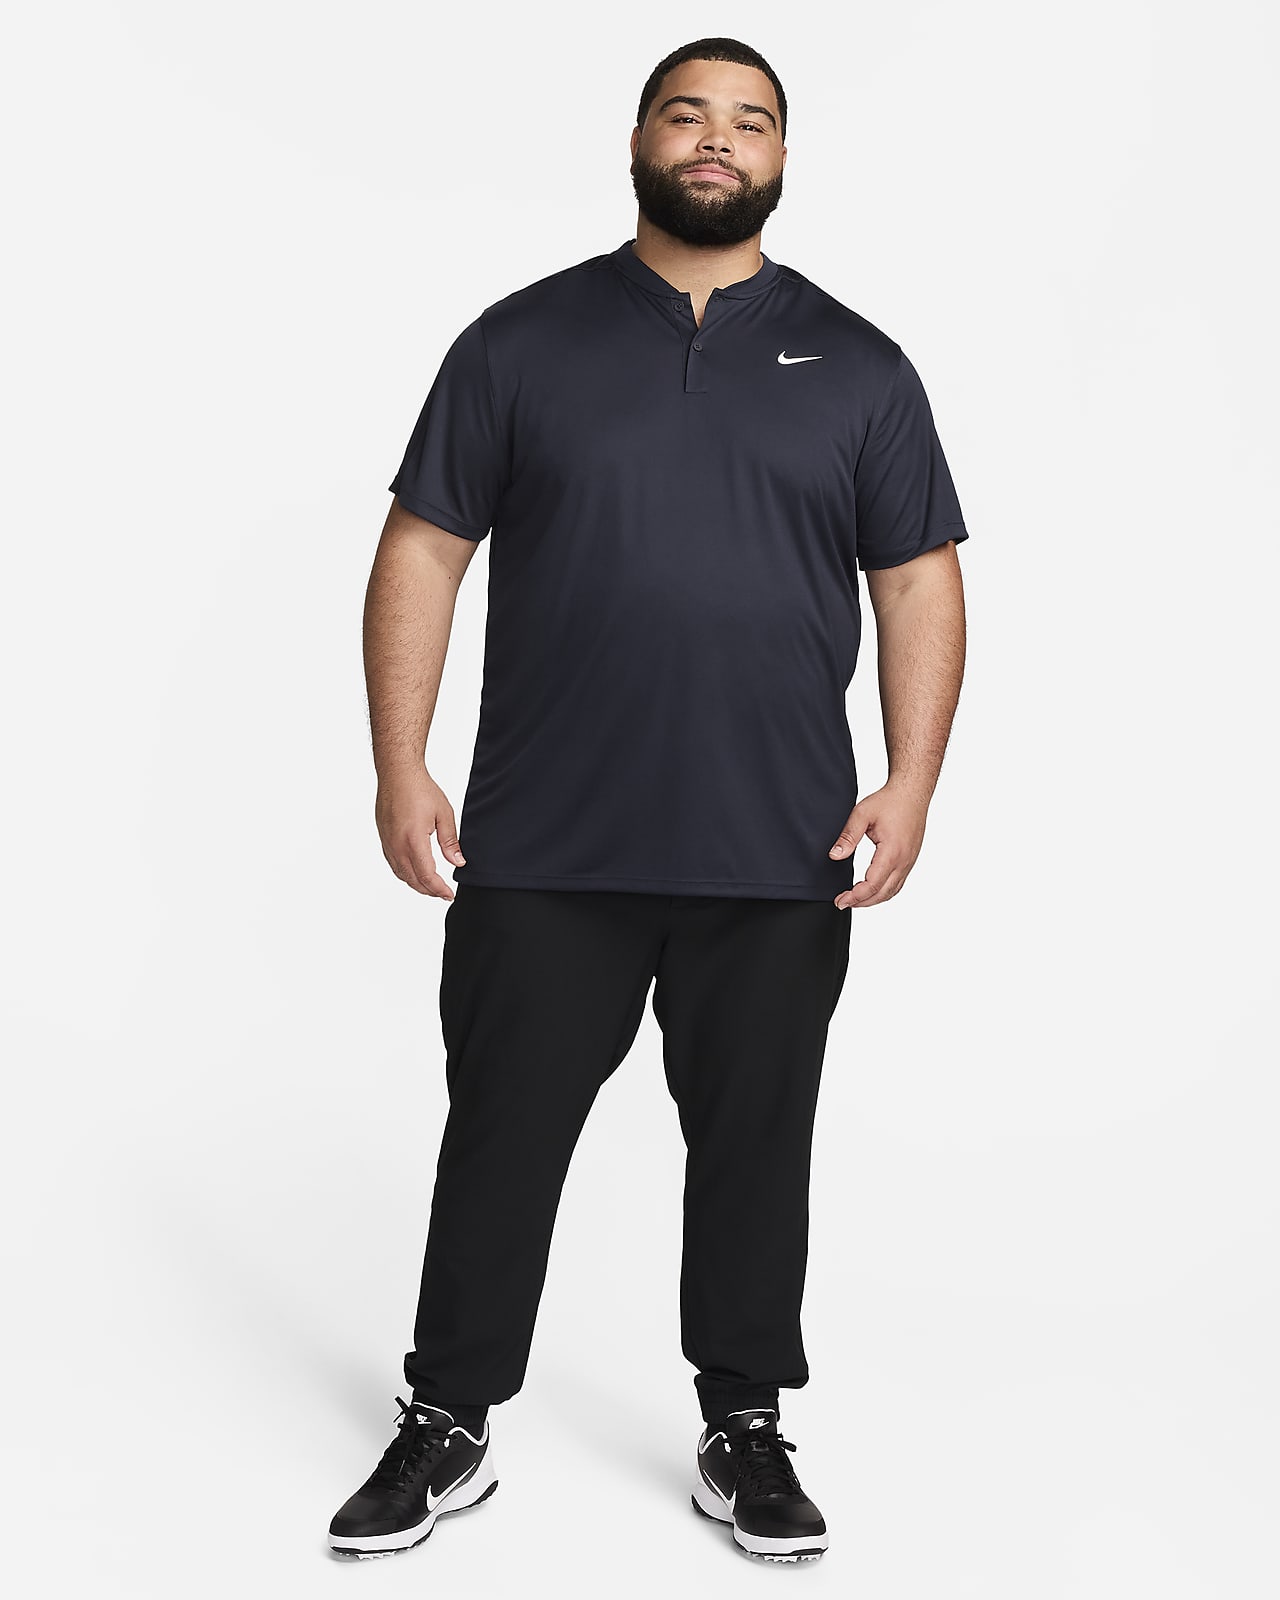  Nike Team Mens Short Sleeve Dri-Fit Polo, Anthracite/black,  Small : Clothing, Shoes & Jewelry